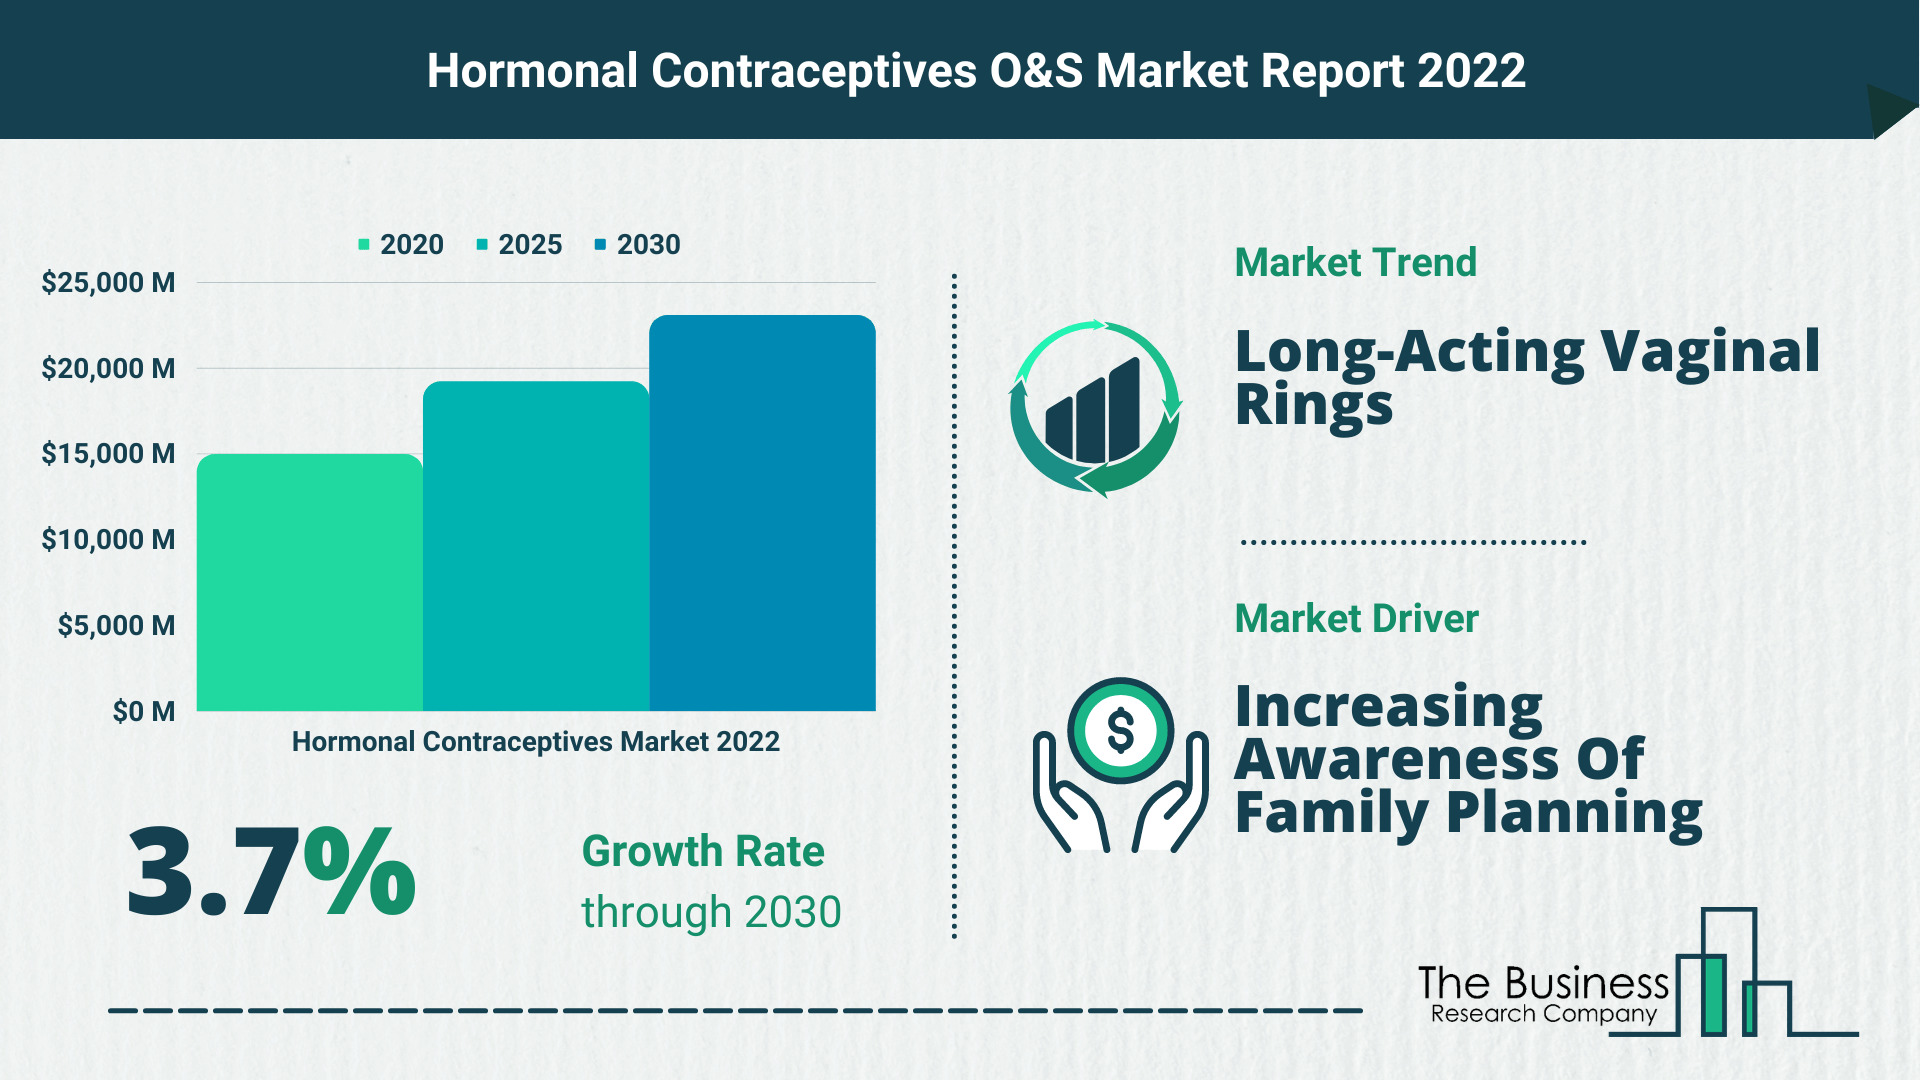 The Hormonal Contraceptives Market Forecast Until 2030 – Opportunities And Strategies